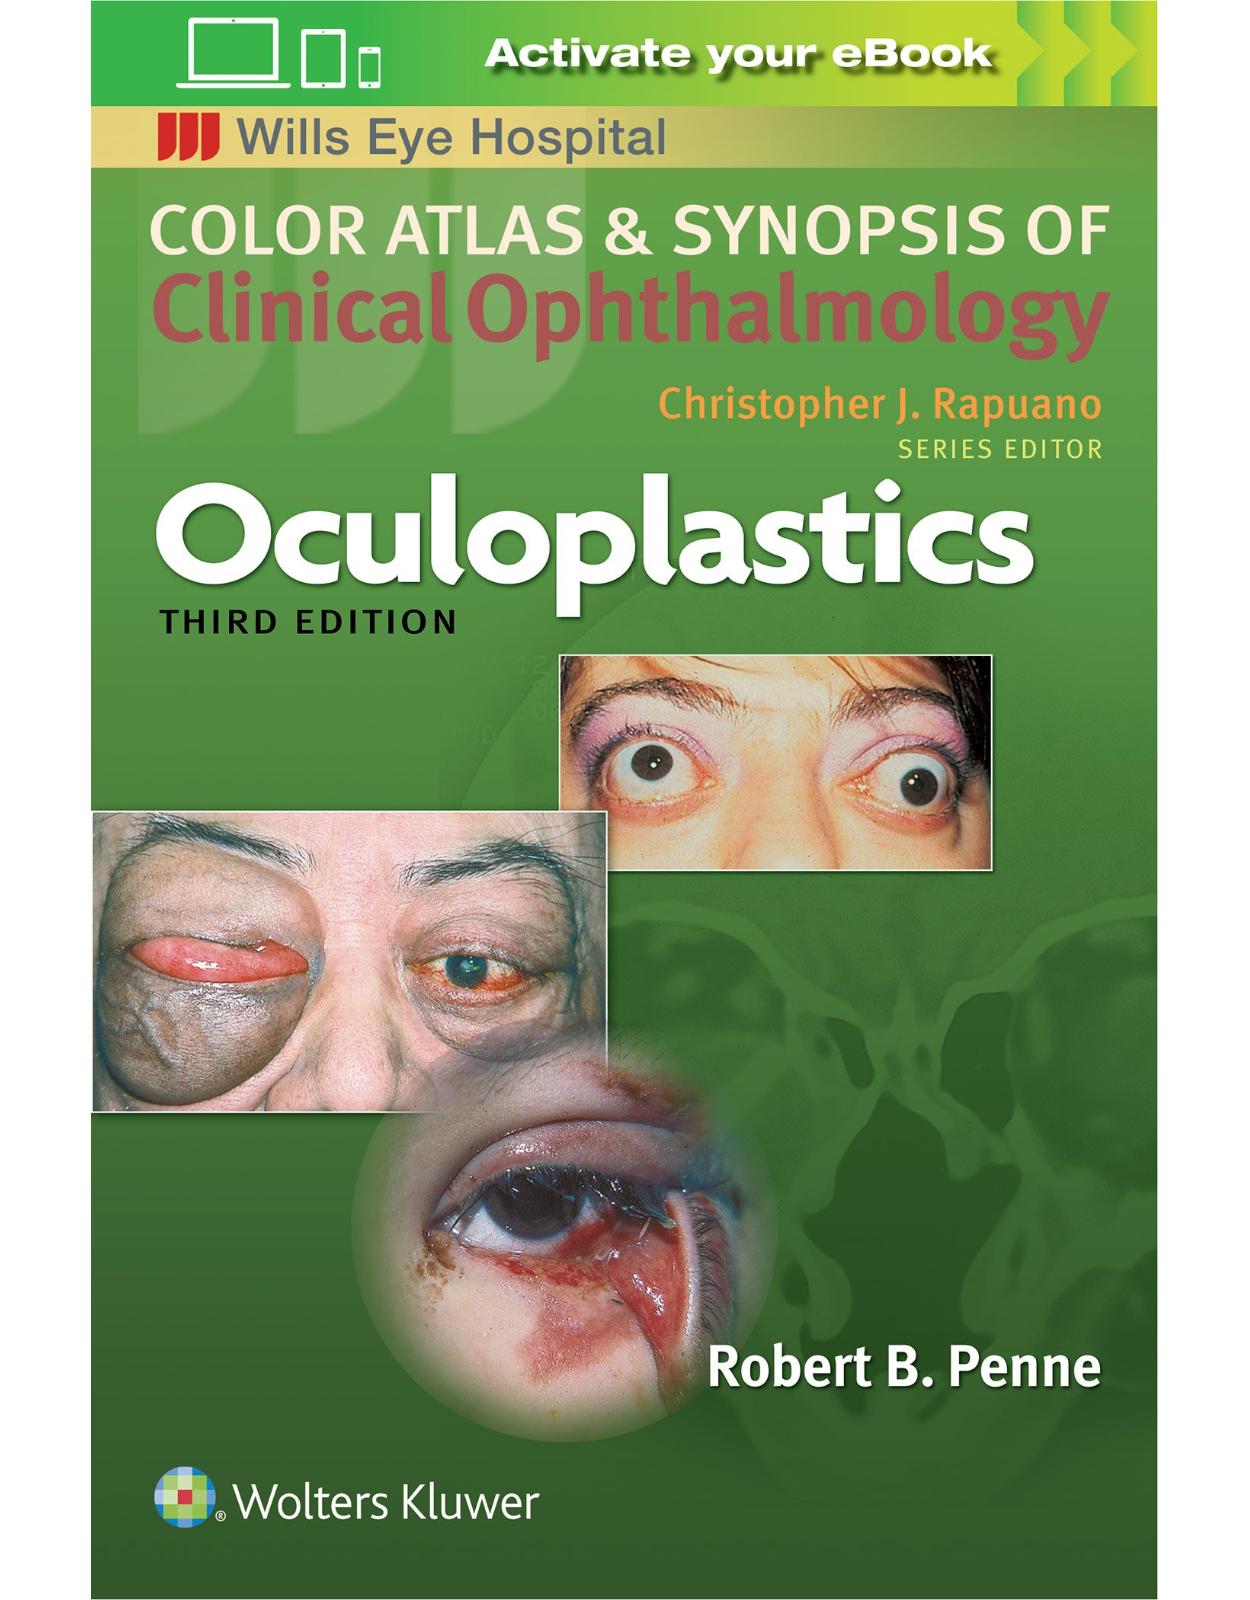 Oculoplastics (Color Atlas & Synopsis of Clinical Ophthalmology)